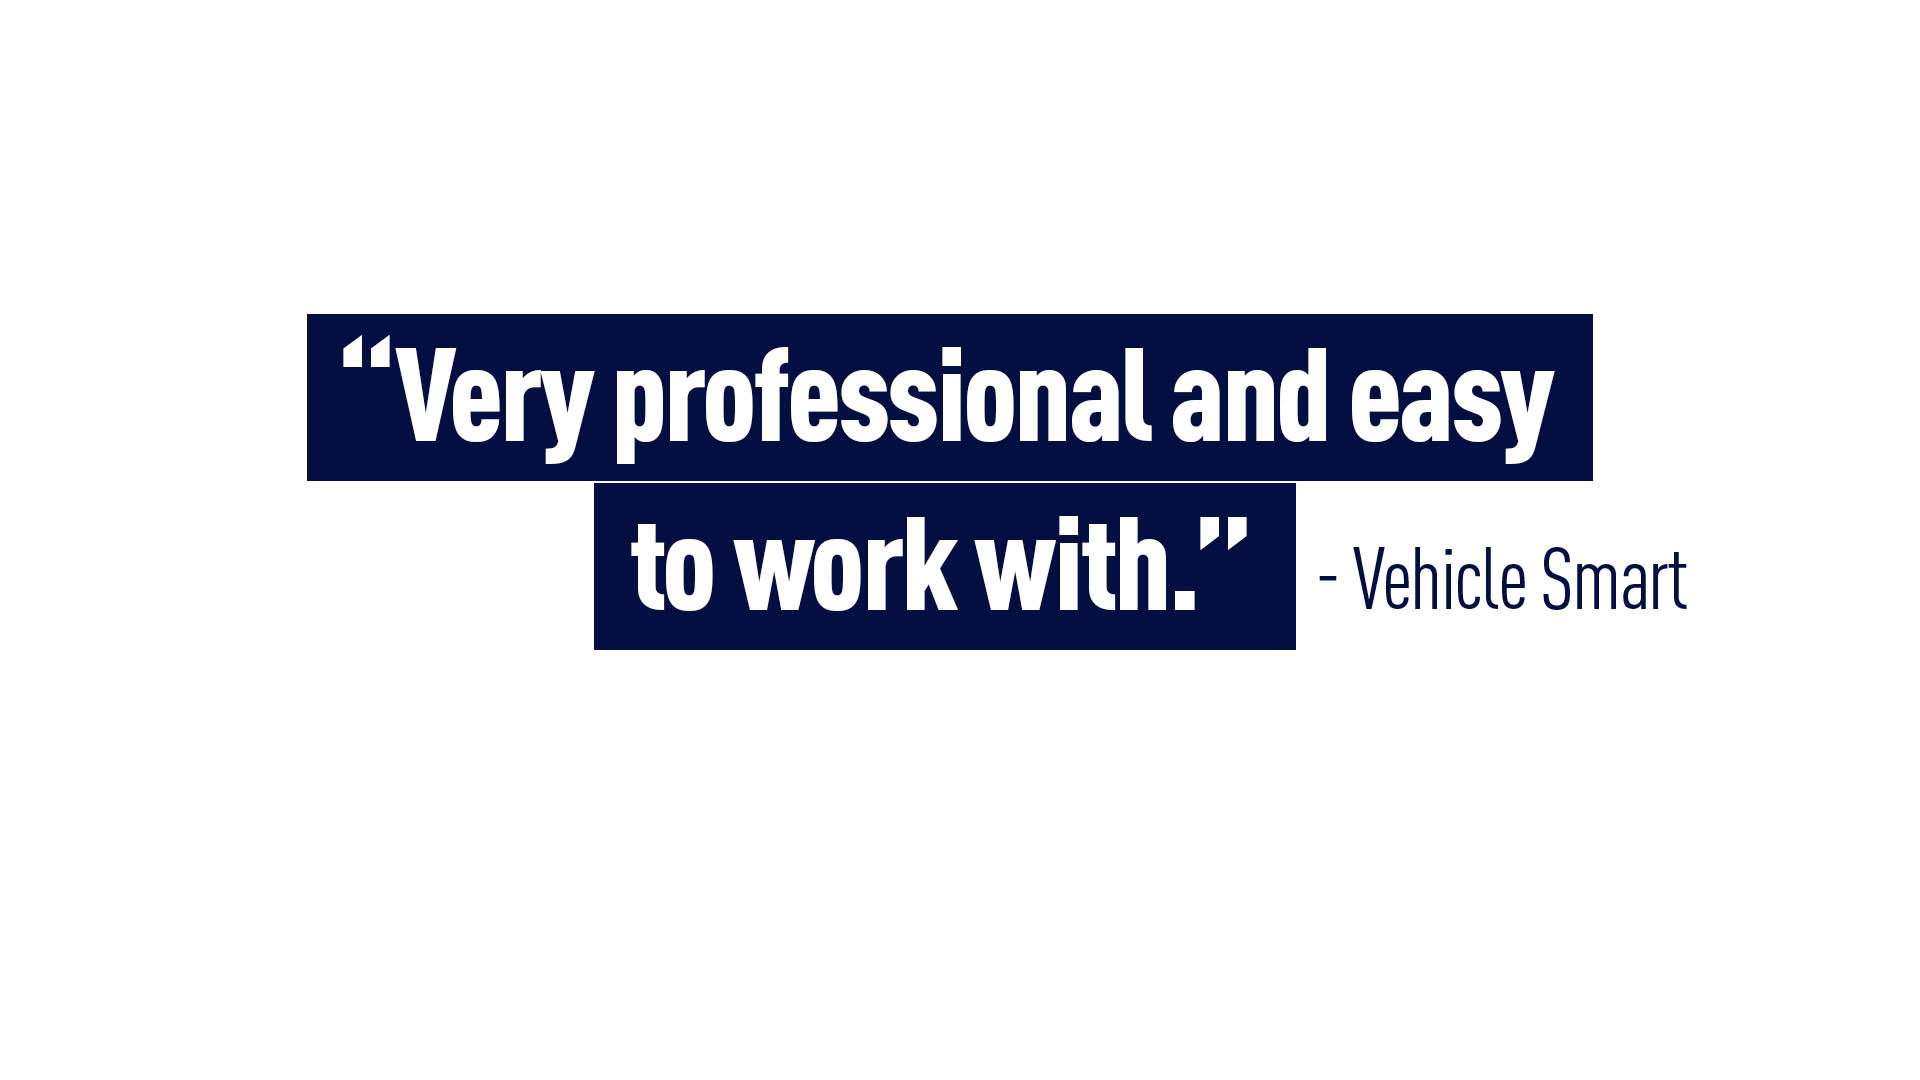 “Very professional and easy to work with.” – Vehicle Smart